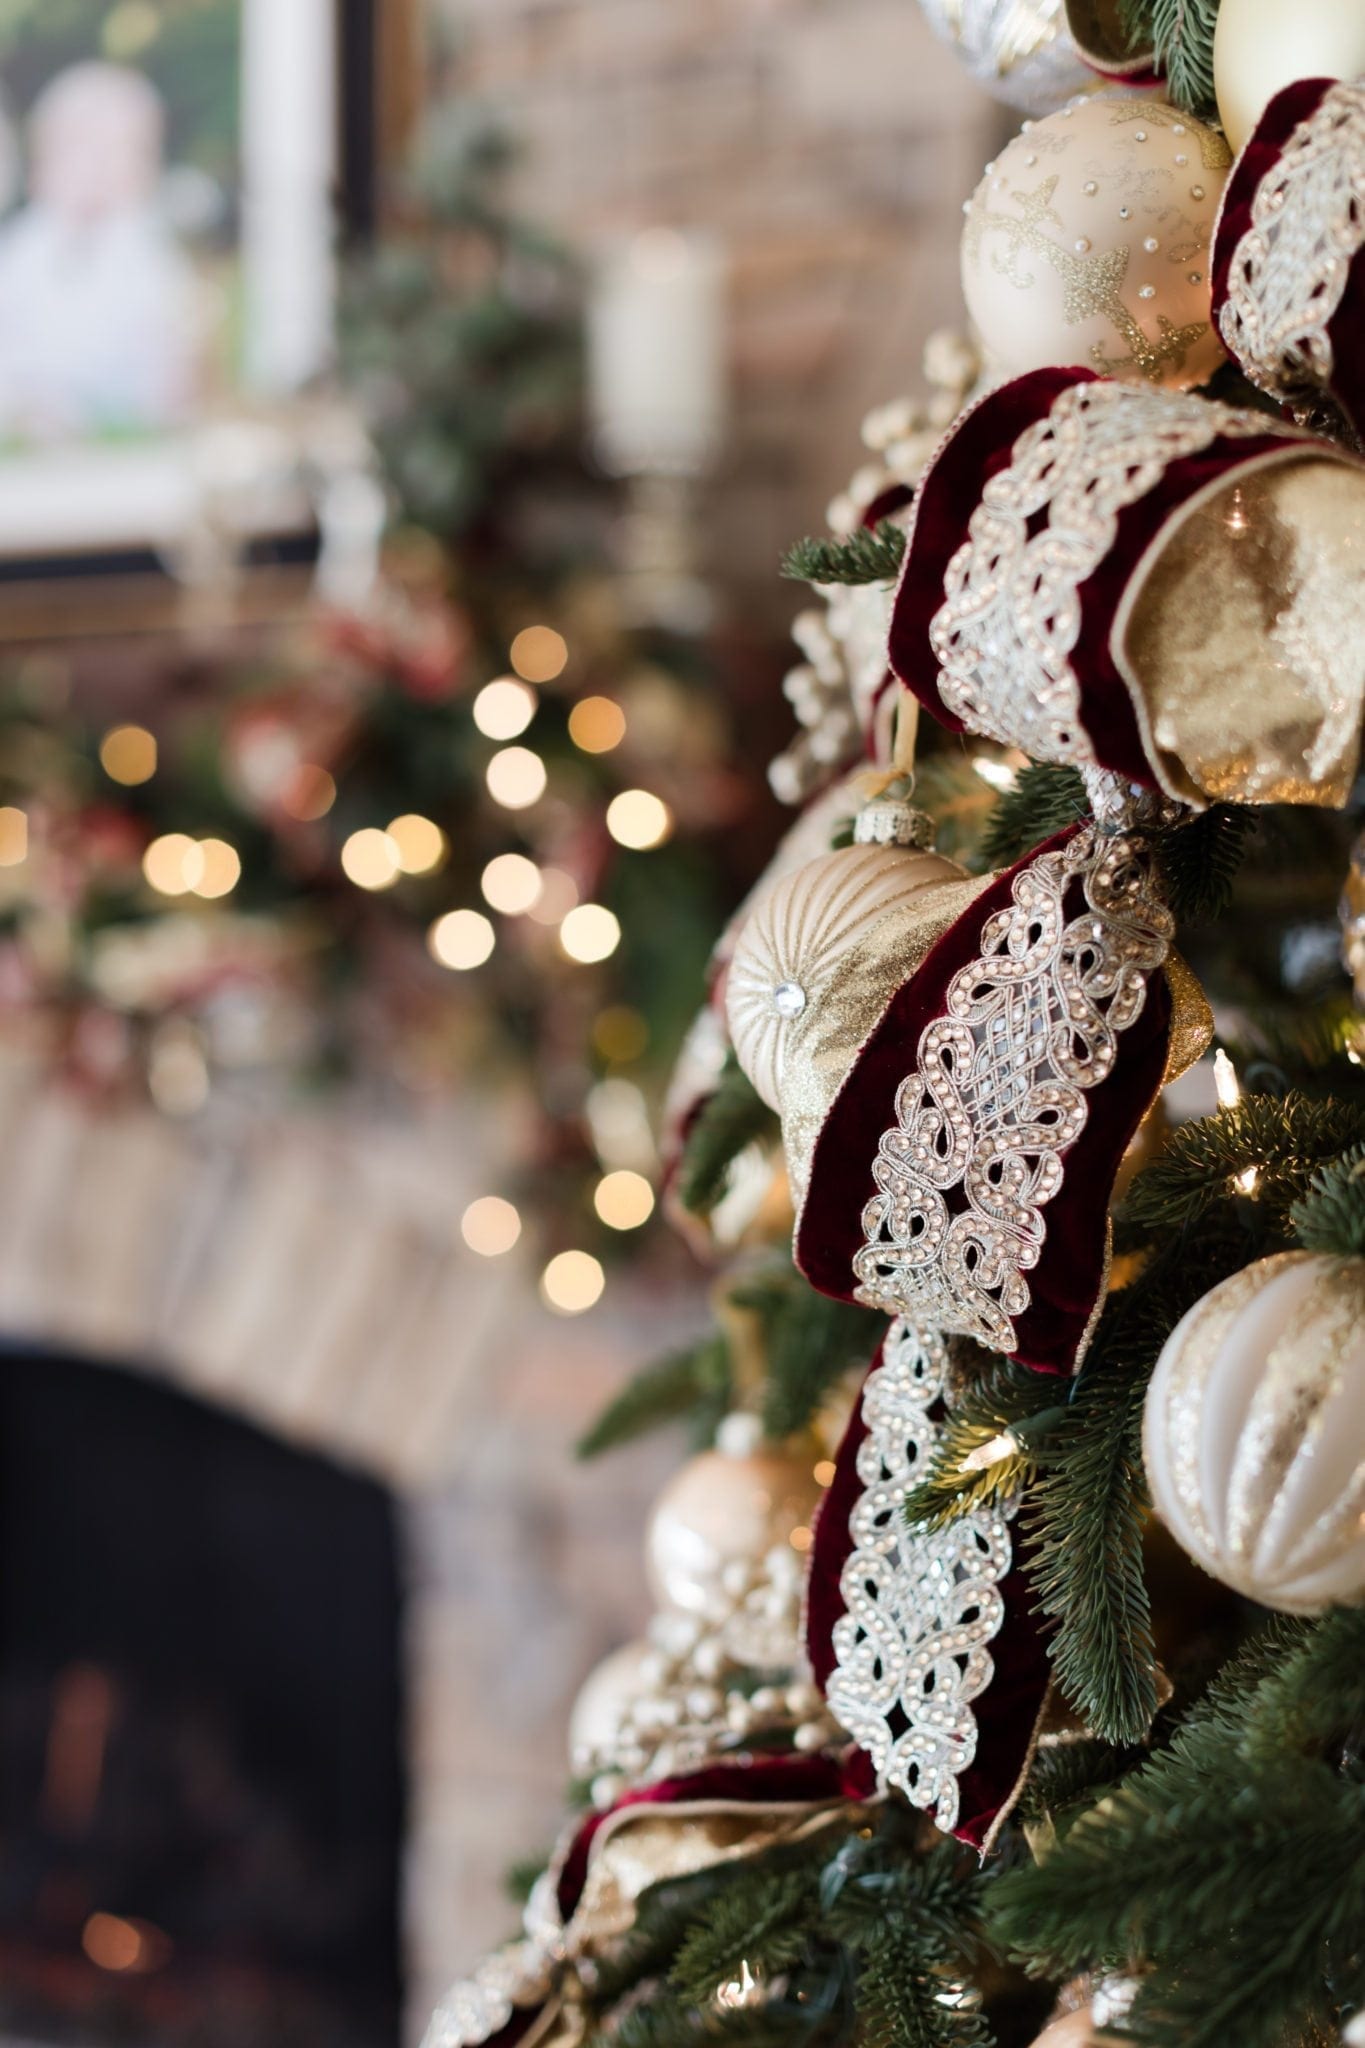 Garnet and gold Christmas decorations. Christmas tree ideas in garnet and gold.